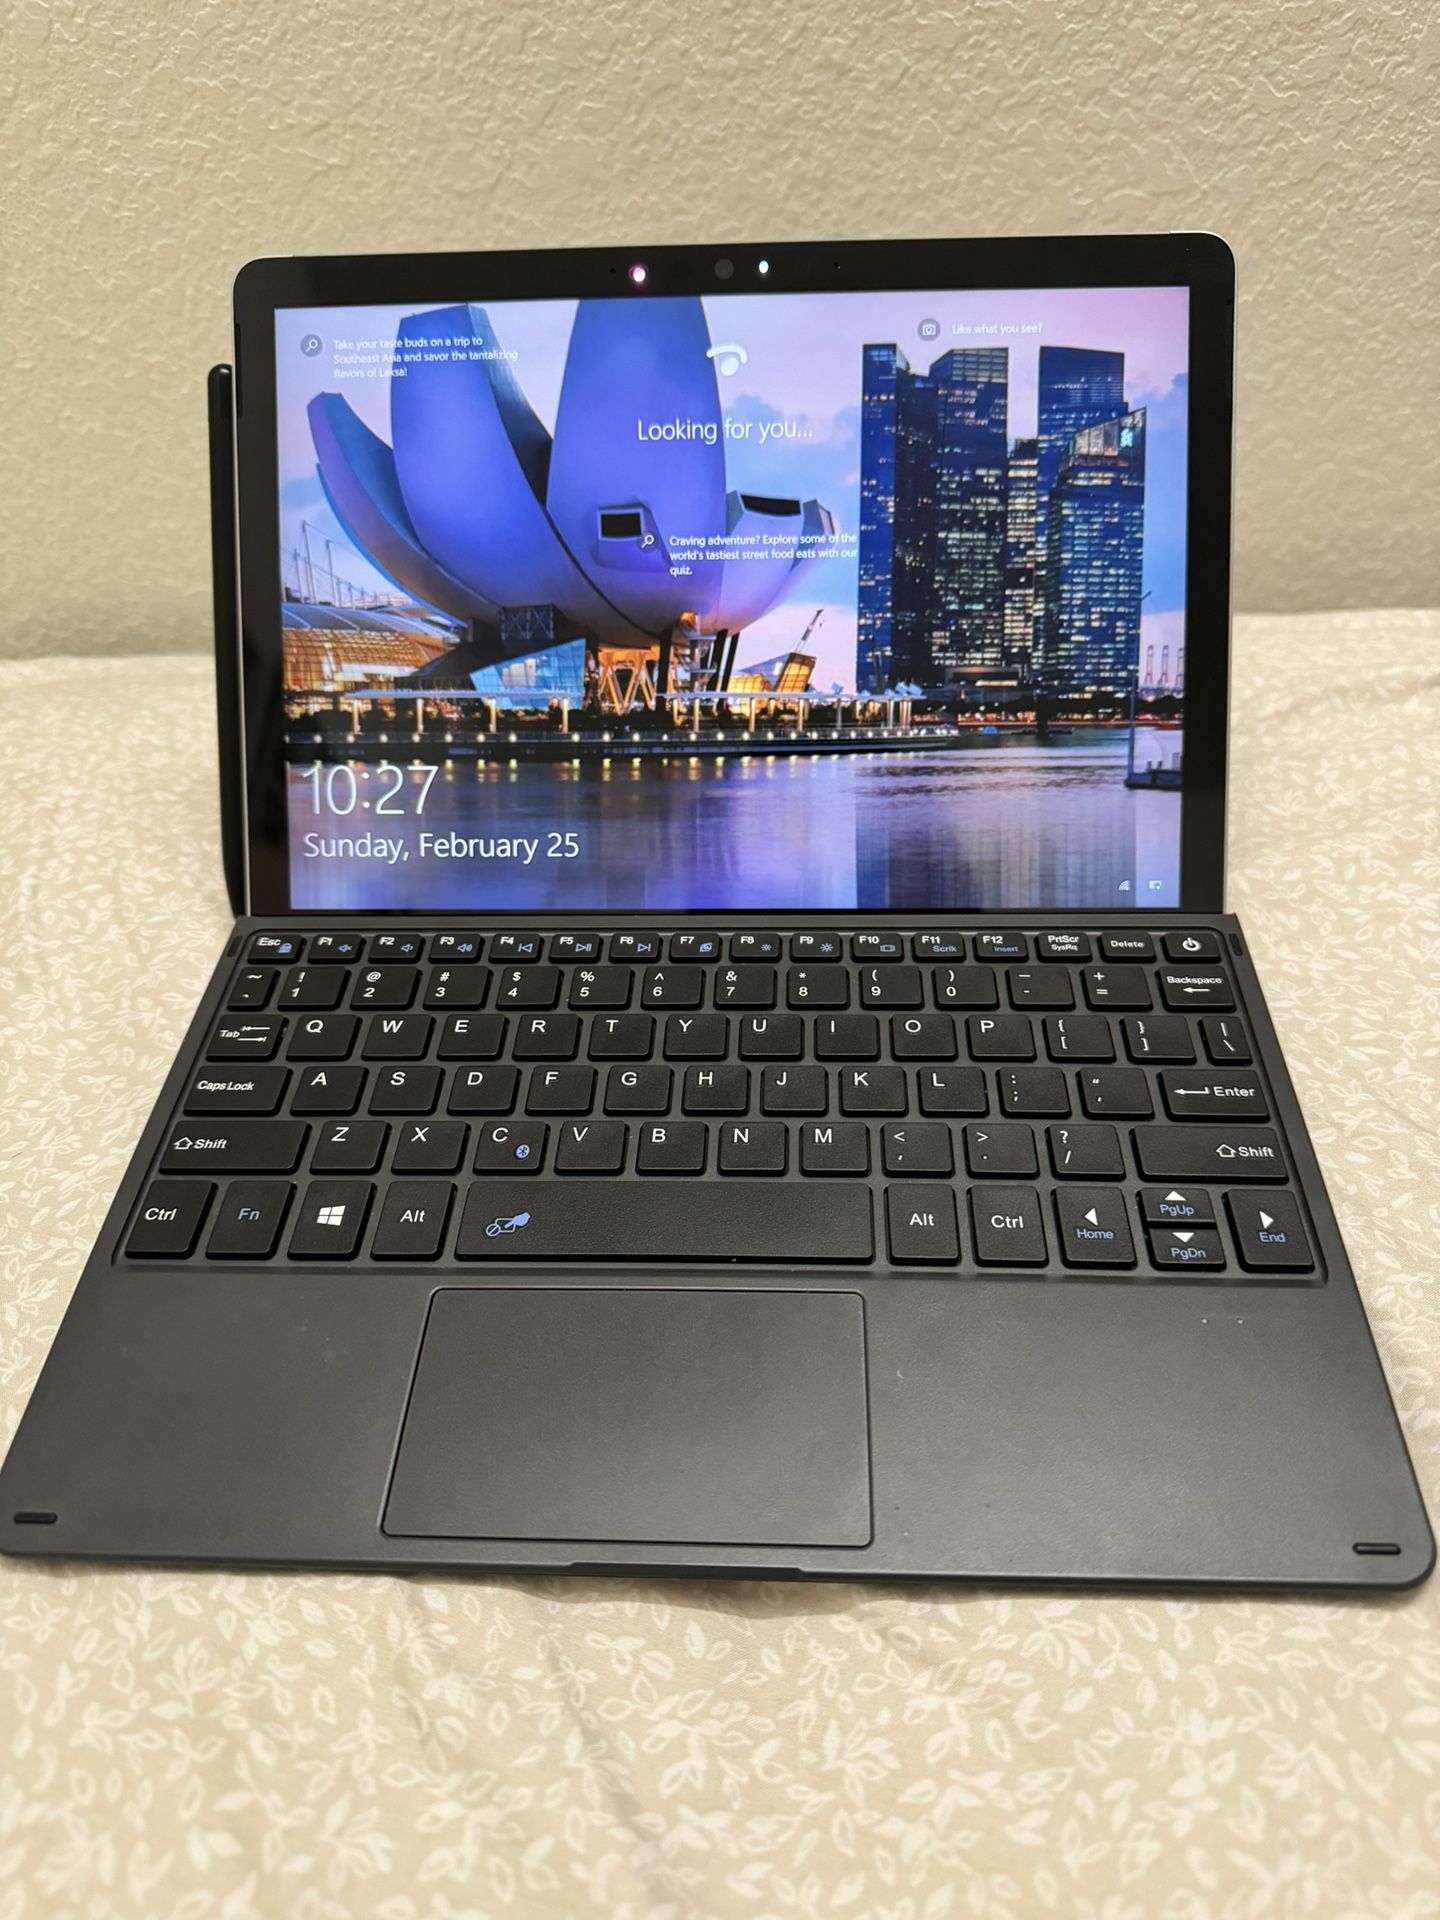 Microsoft Surface With Keyboard, Pen, Charger